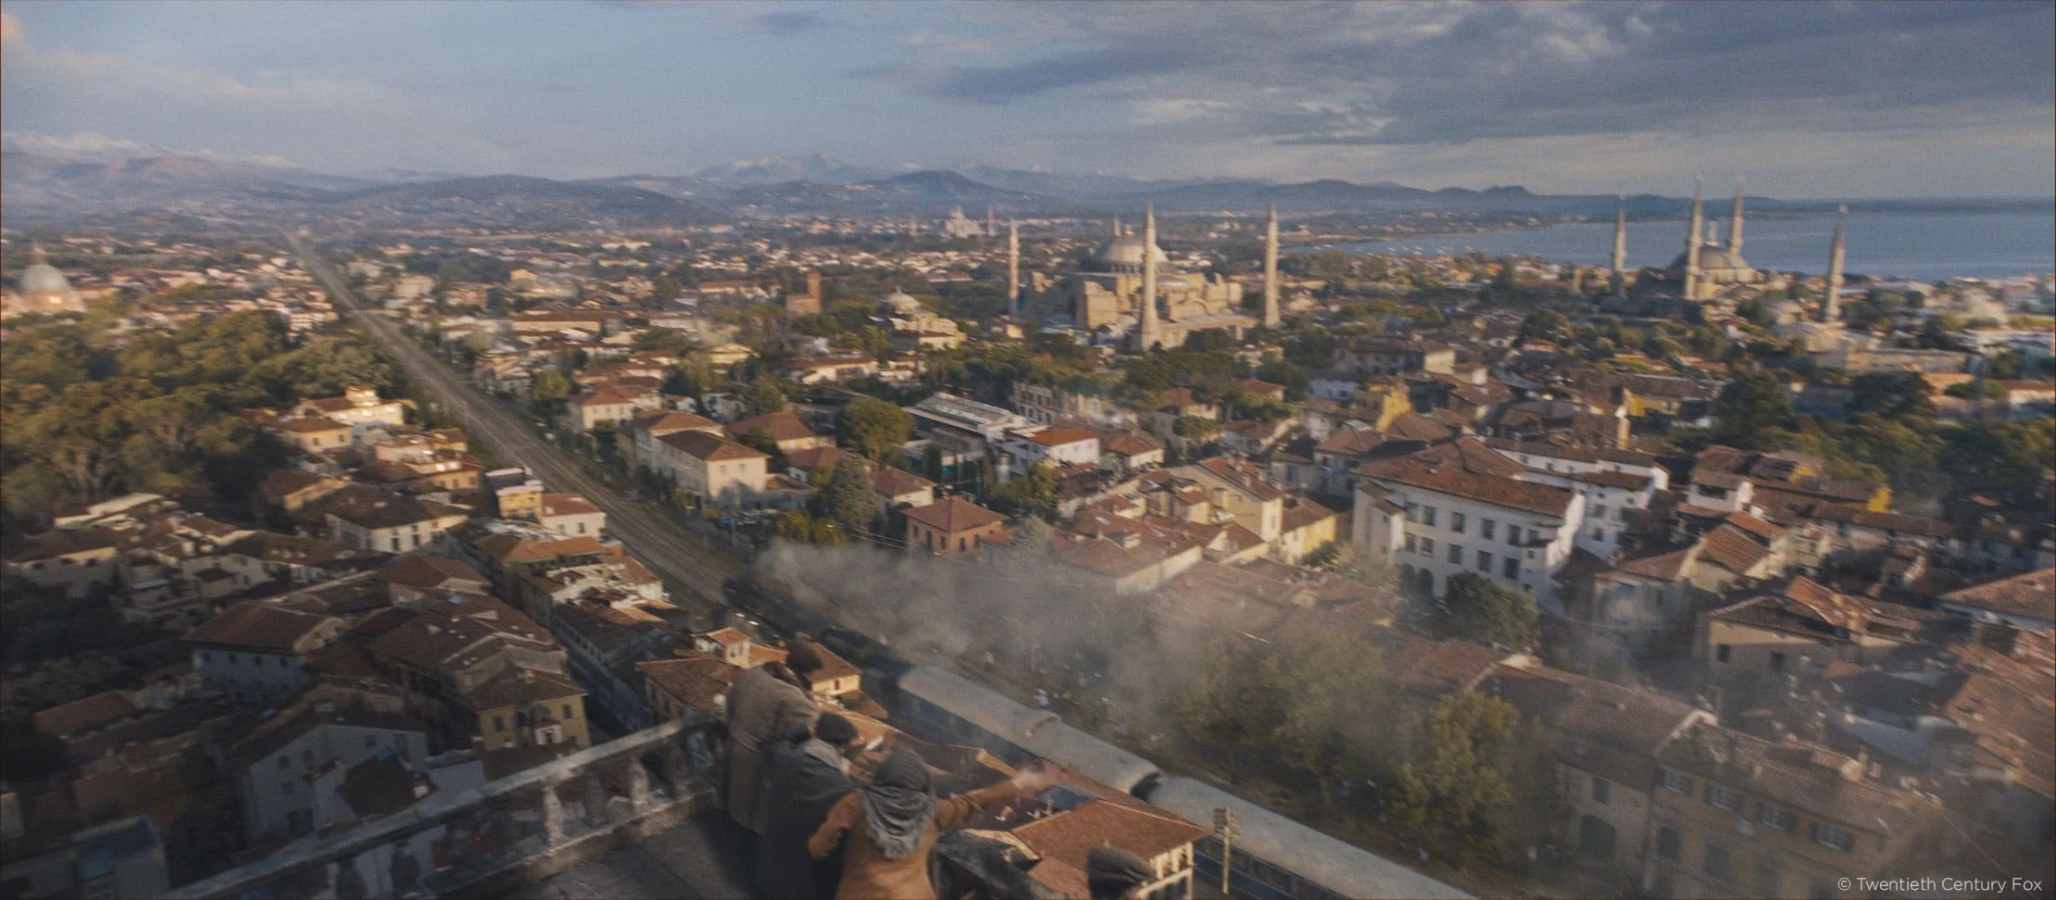  Murder on the Orient express Aerial view of the train passing through Istanbul Raynault vfx 